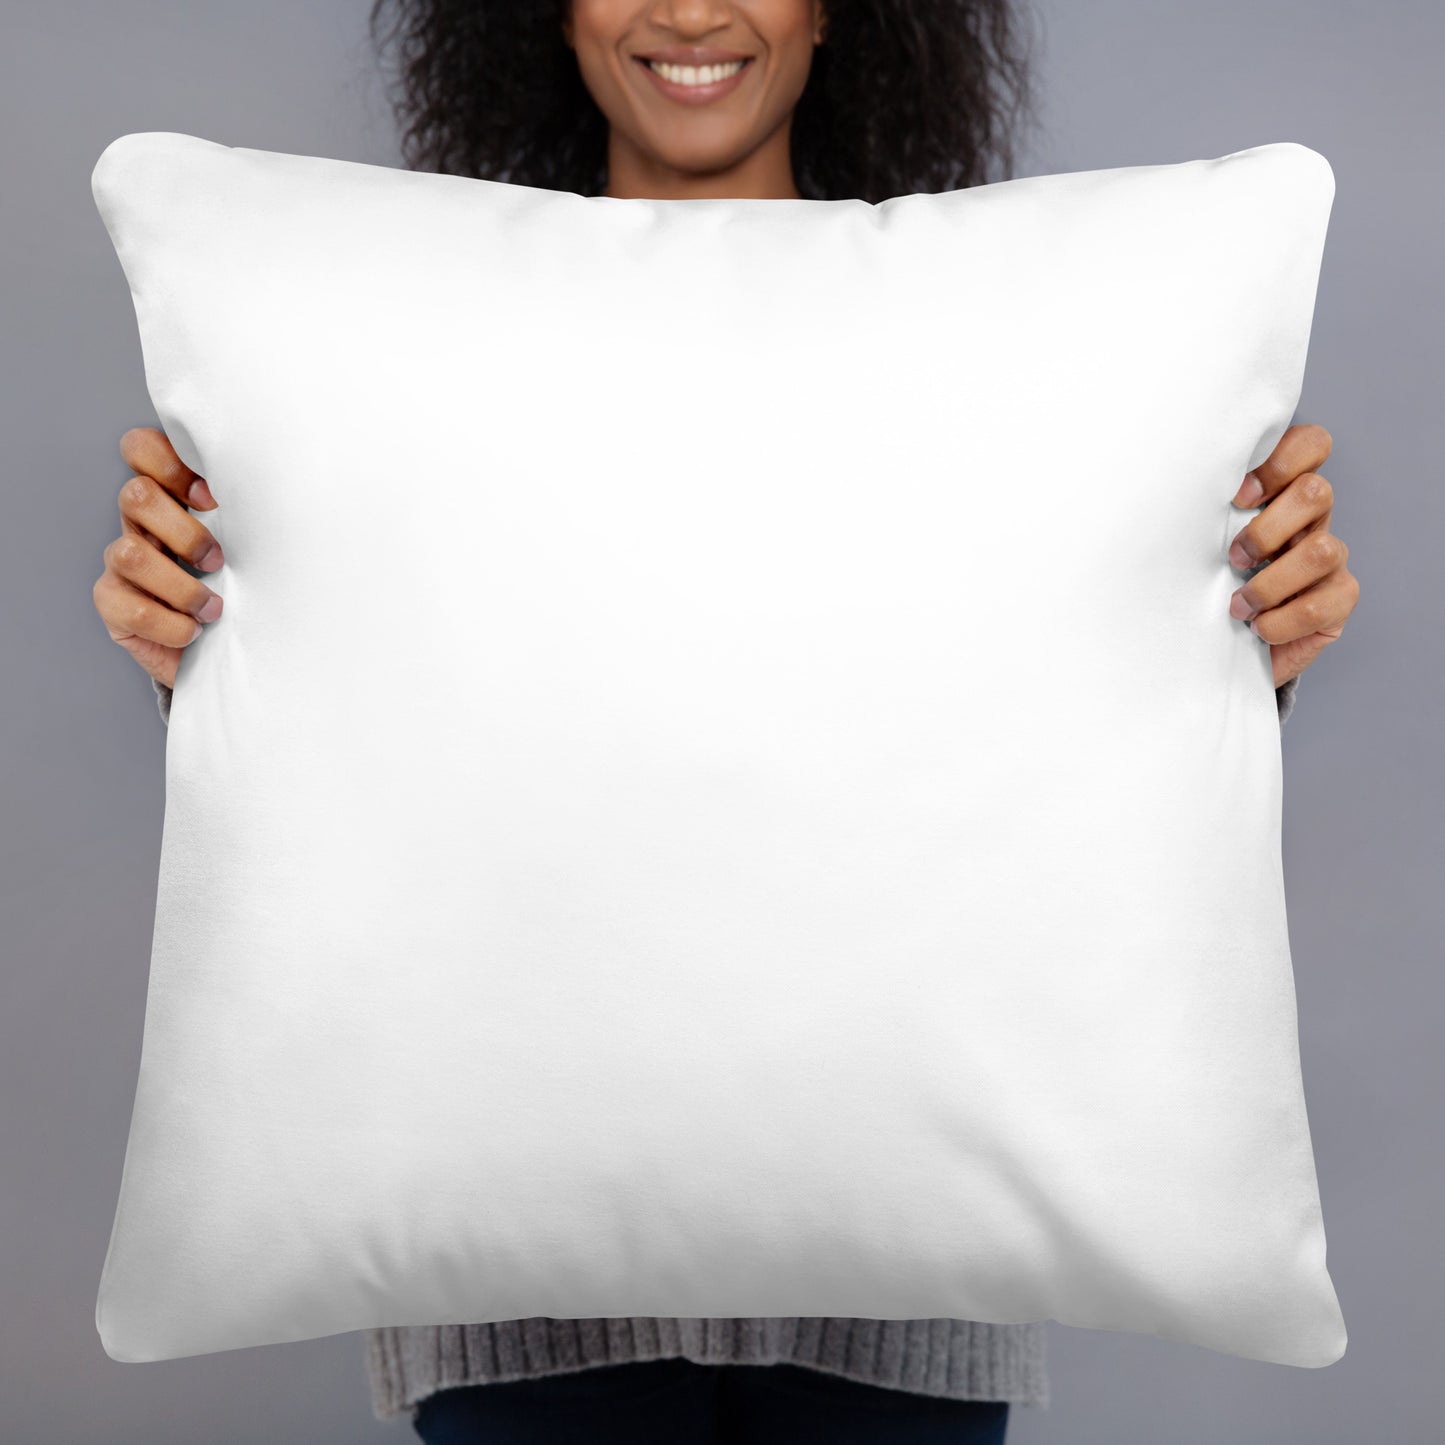 Let's make today amazingly awesome ! - Basic Pillow